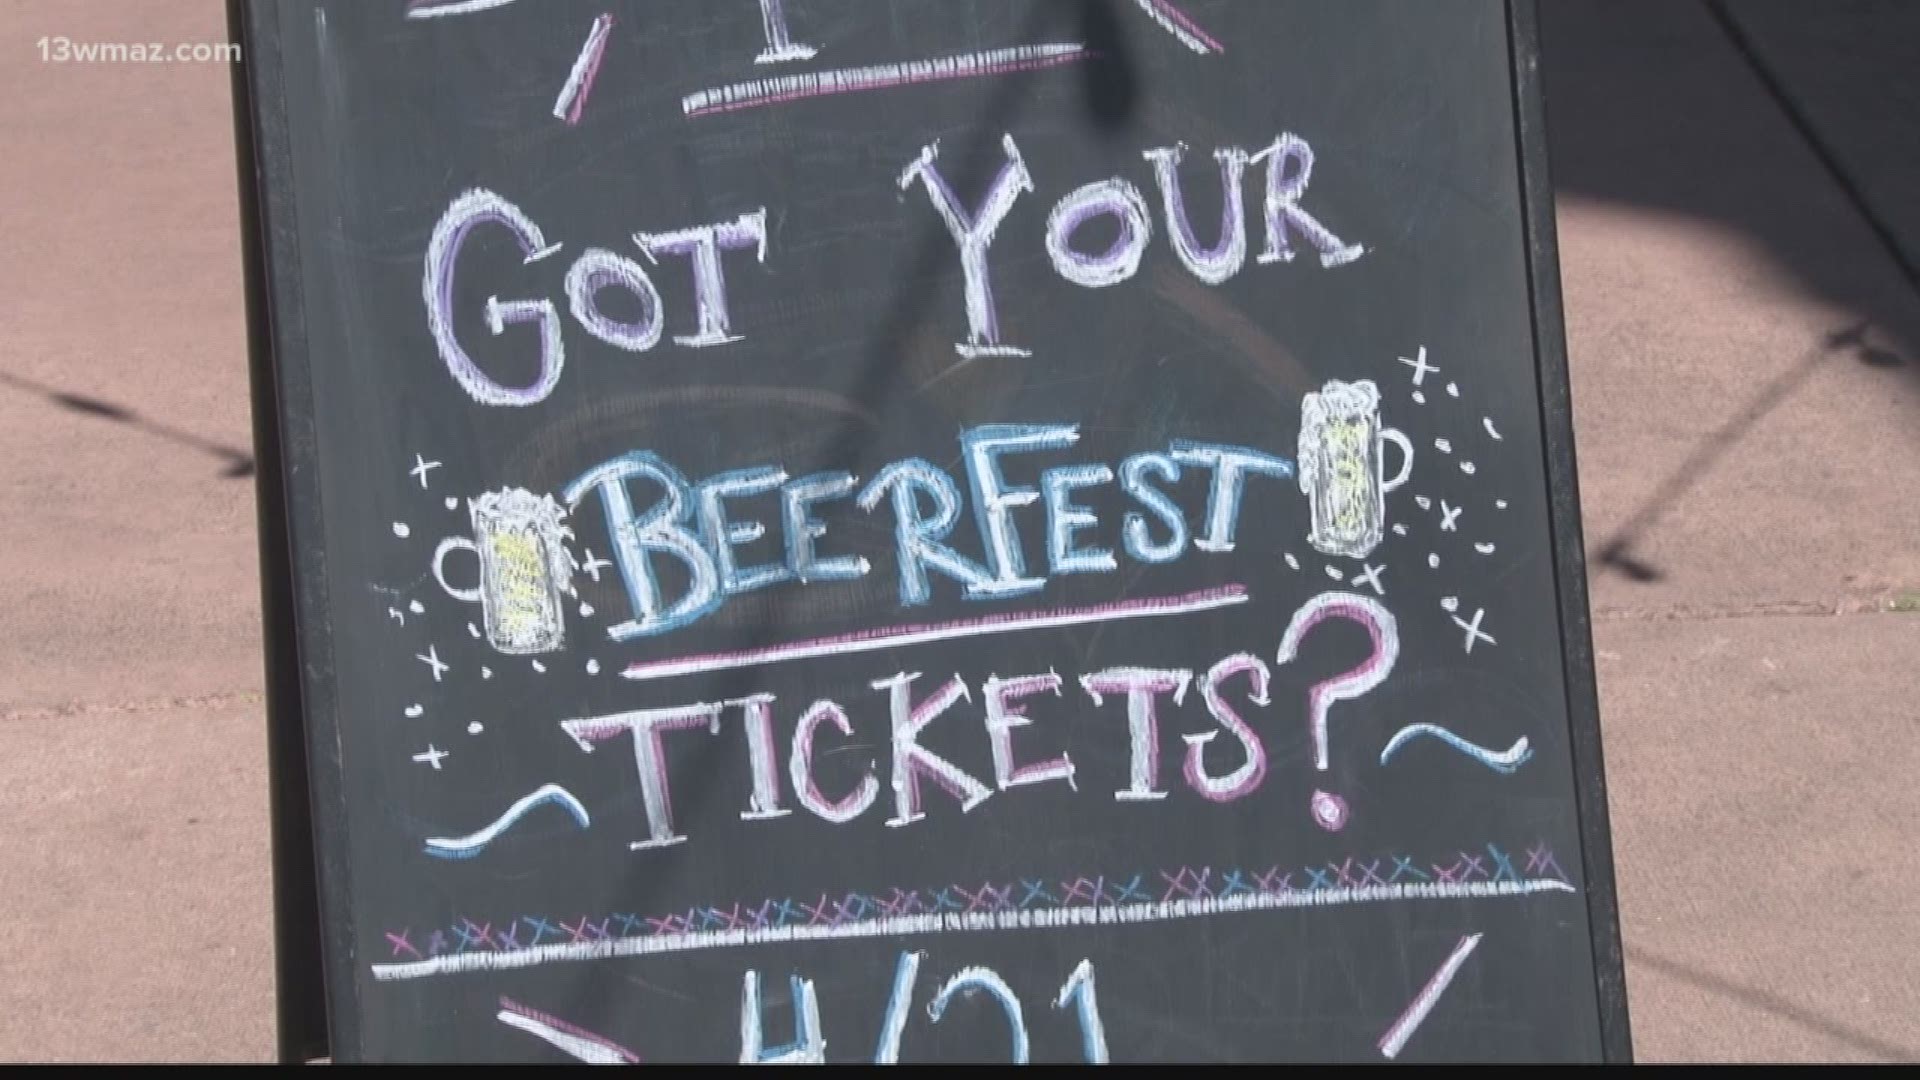 Just Tap'd BeerFest this weekend